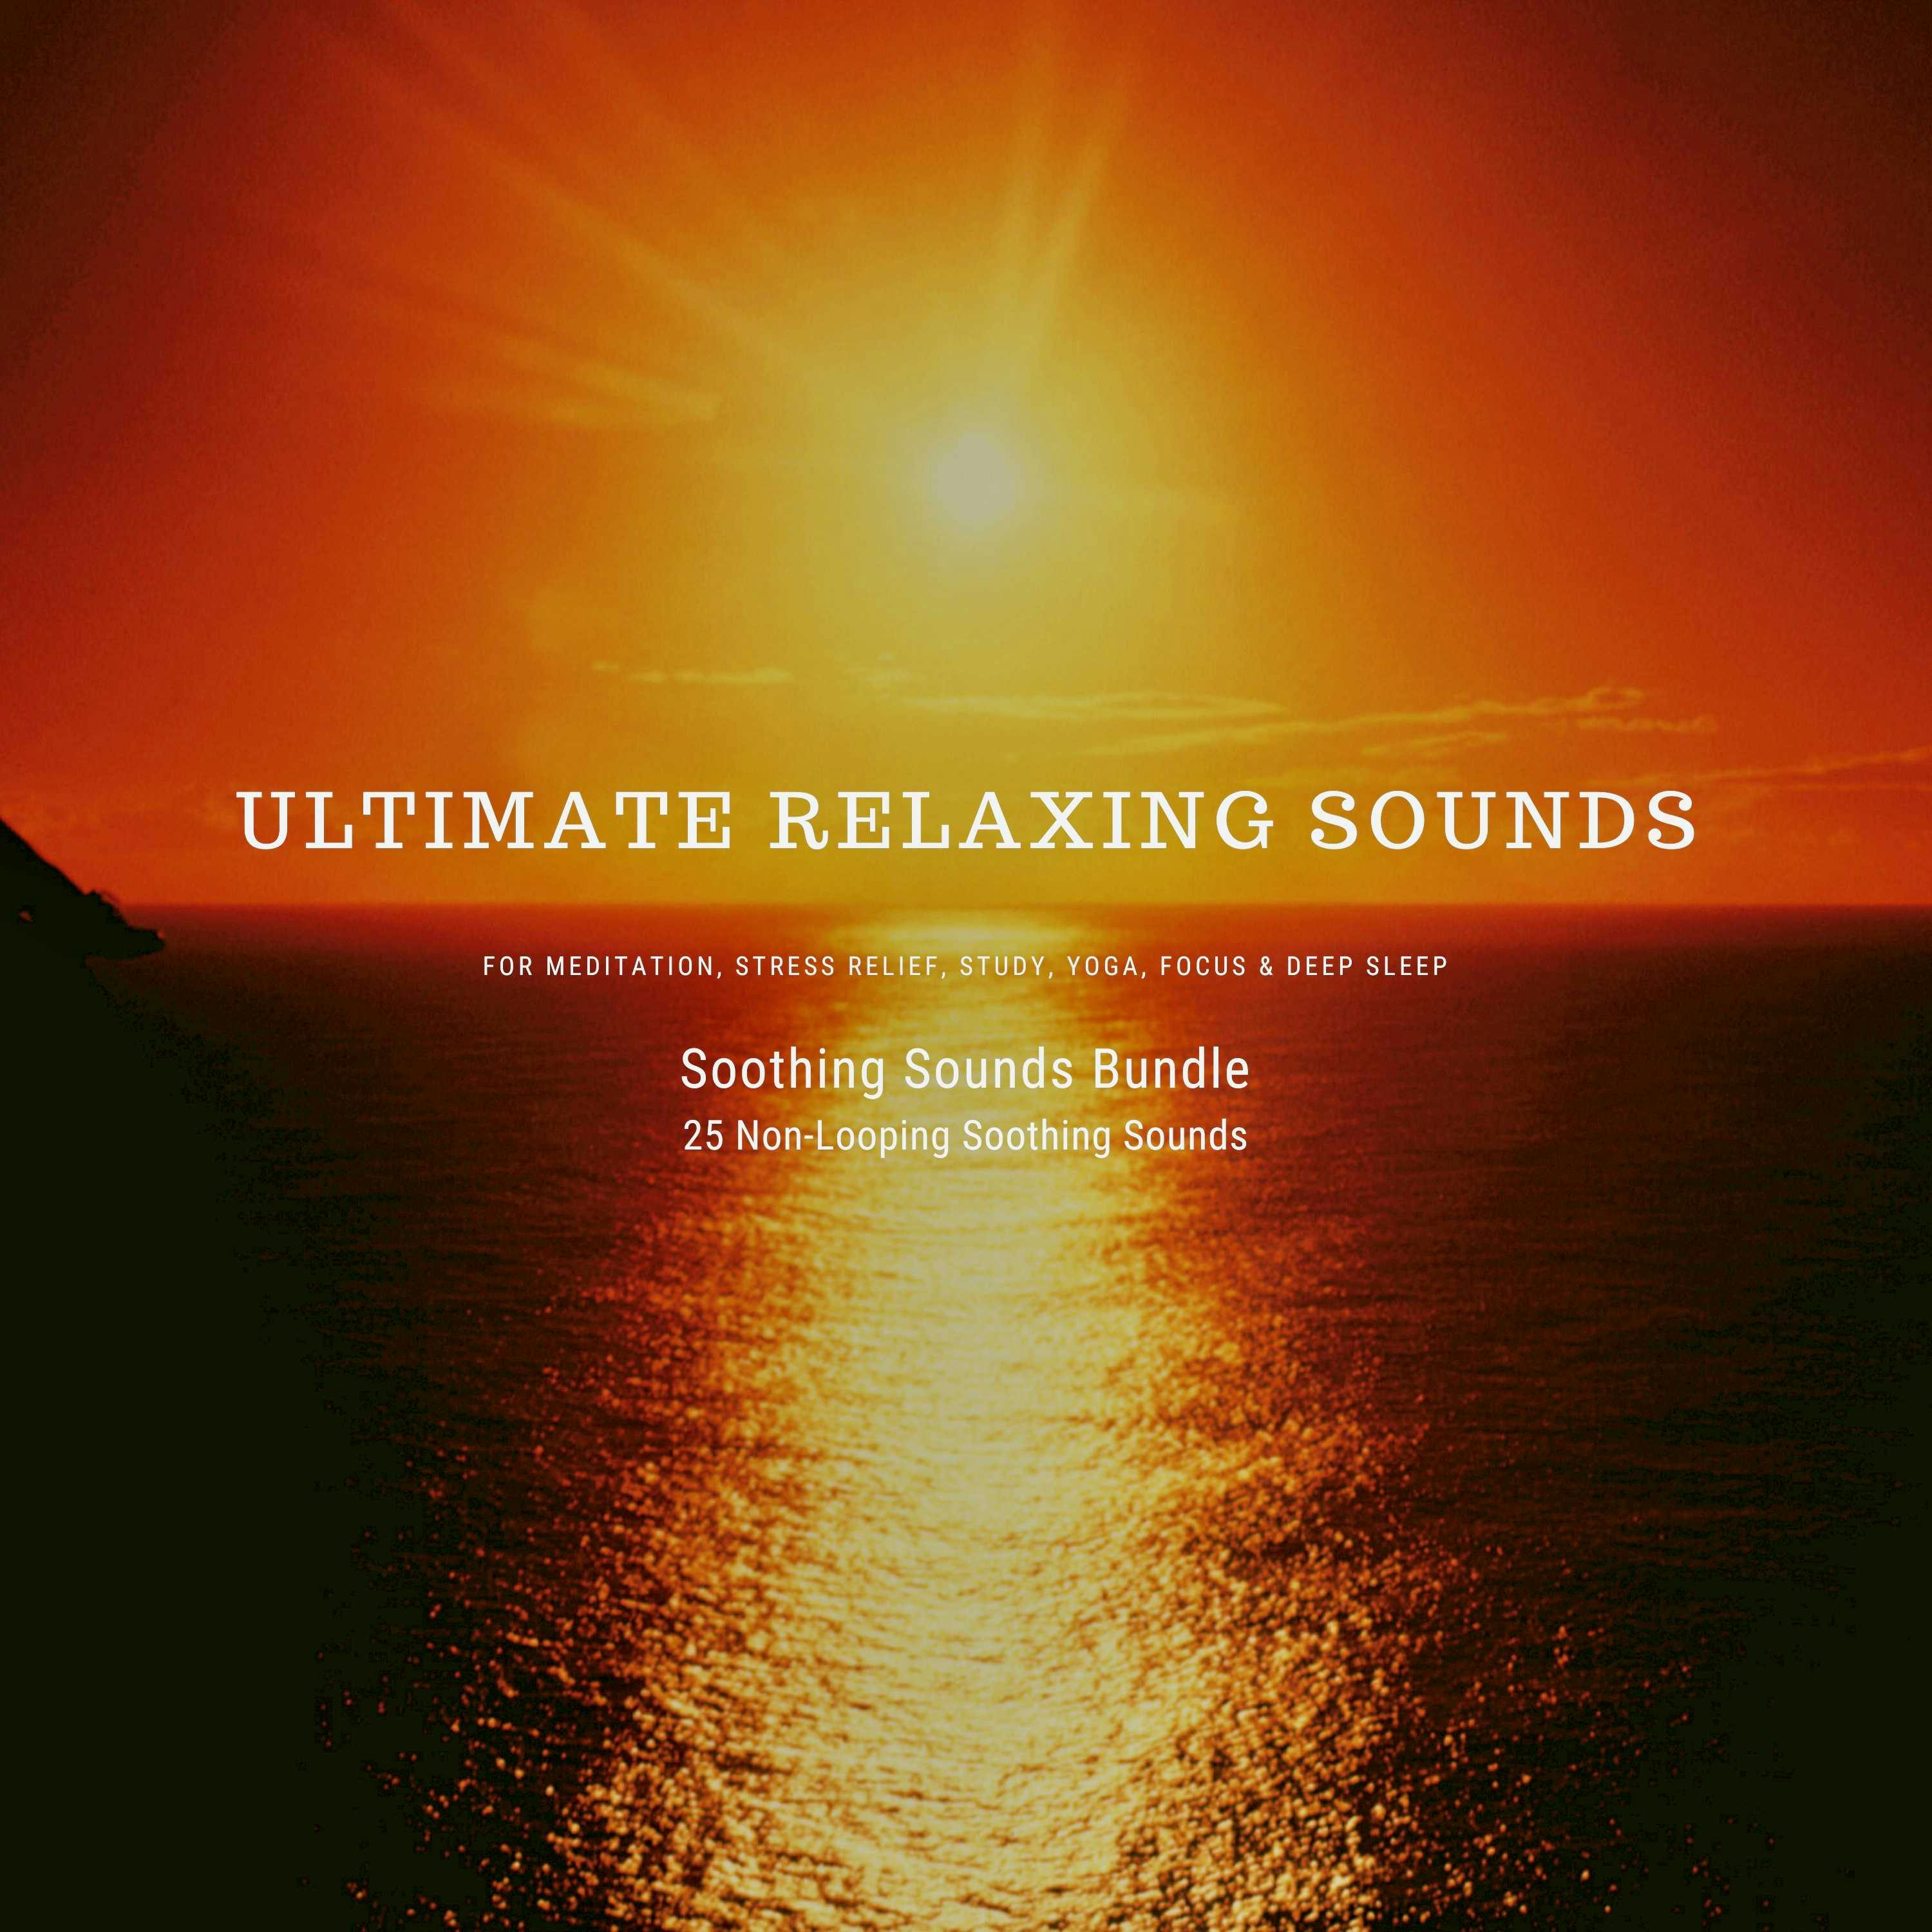 Ultimate Relaxing Sounds for Meditation, Stress Relief, Study, Yoga, Focus & Deep Sleep: Soothing Sounds Bundle *** 25 Non-Looping Soothing Sounds - undefined